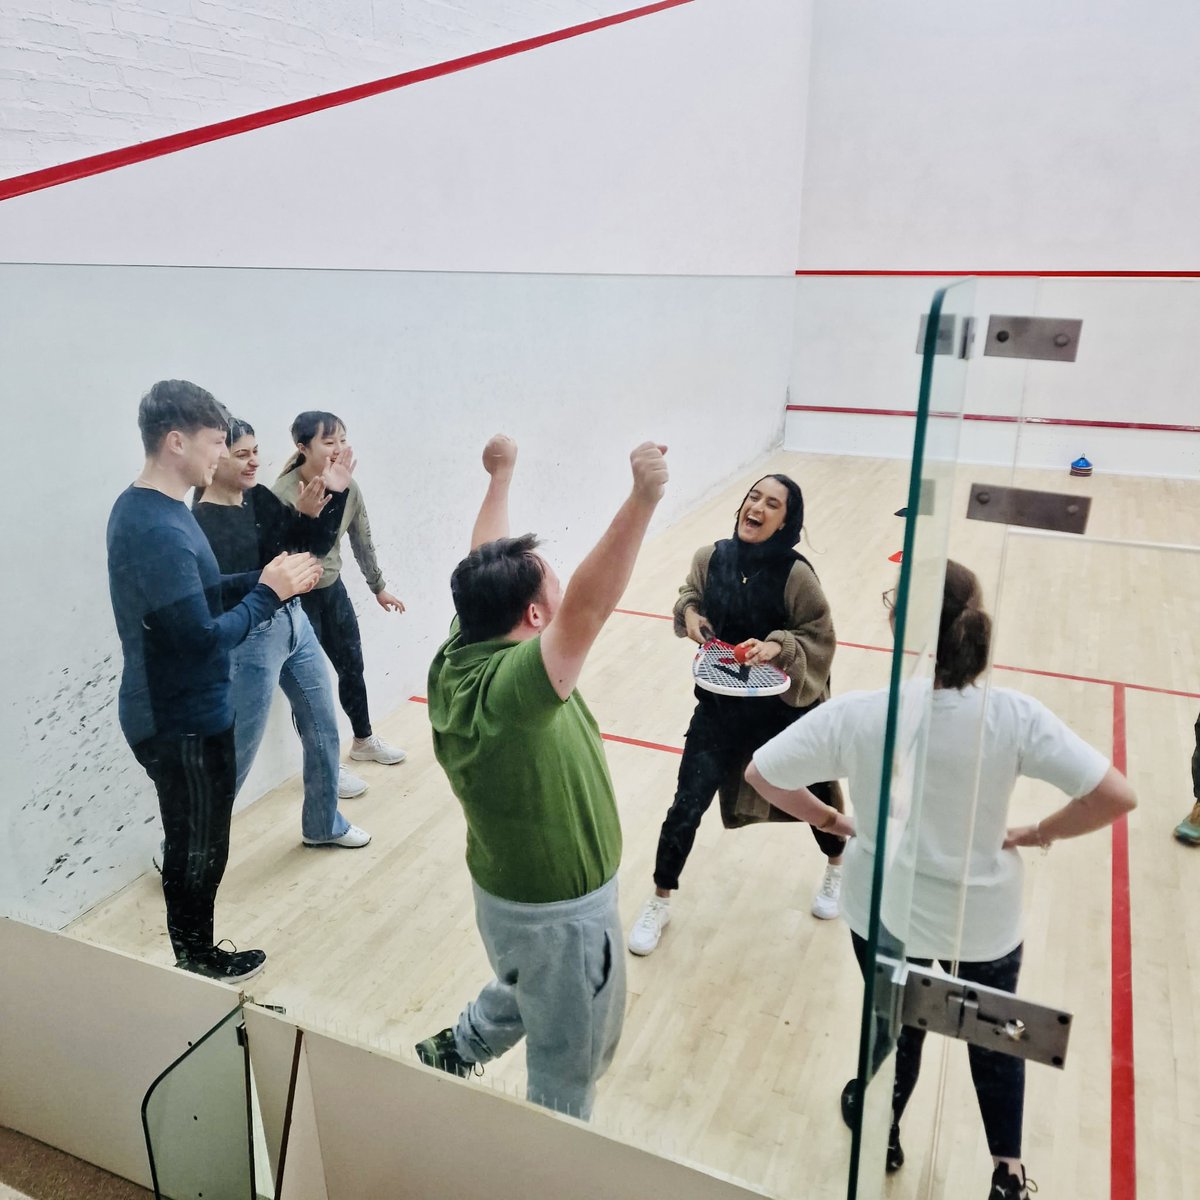 We've got that Friday feeling  😄🙌

It looks like @IMAS_sport4all participants had the best time on court yesterday at Old Crossleyans with @CalderSquash!

Mixed Ability squash rocks 💪